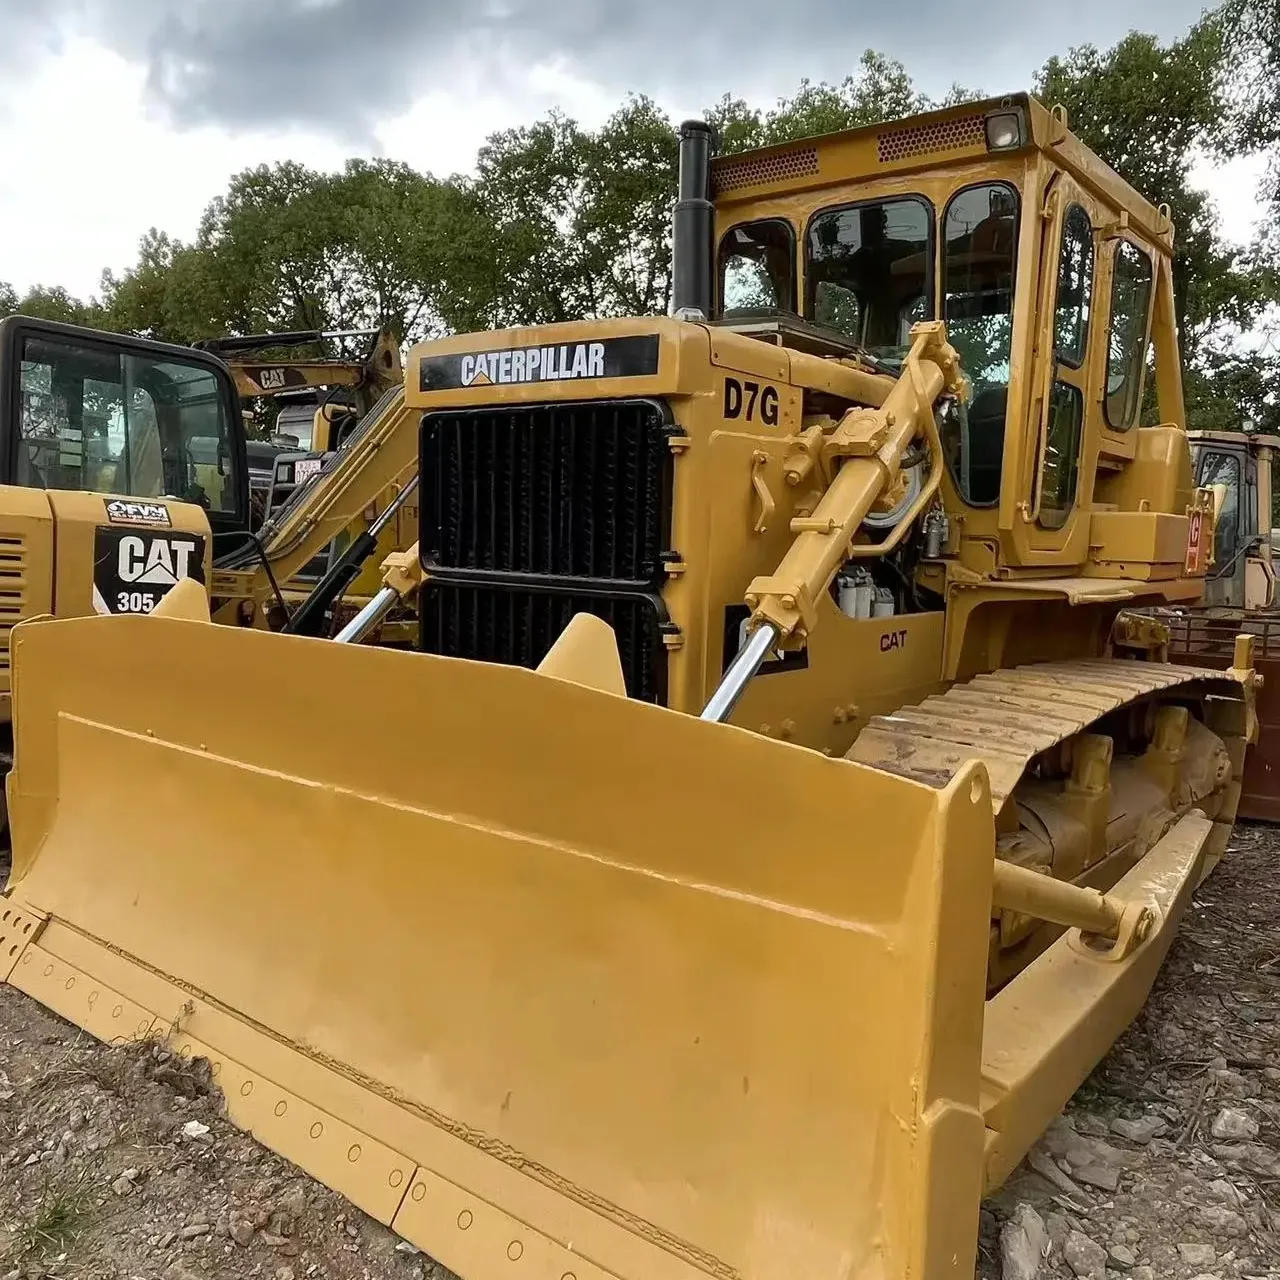 CAT bulldozer dozer used D7G D6H D6D D5K D5G D3G D7G D6D D6M D5M D6H D6R second hand dozer CAT bulldozer for sale